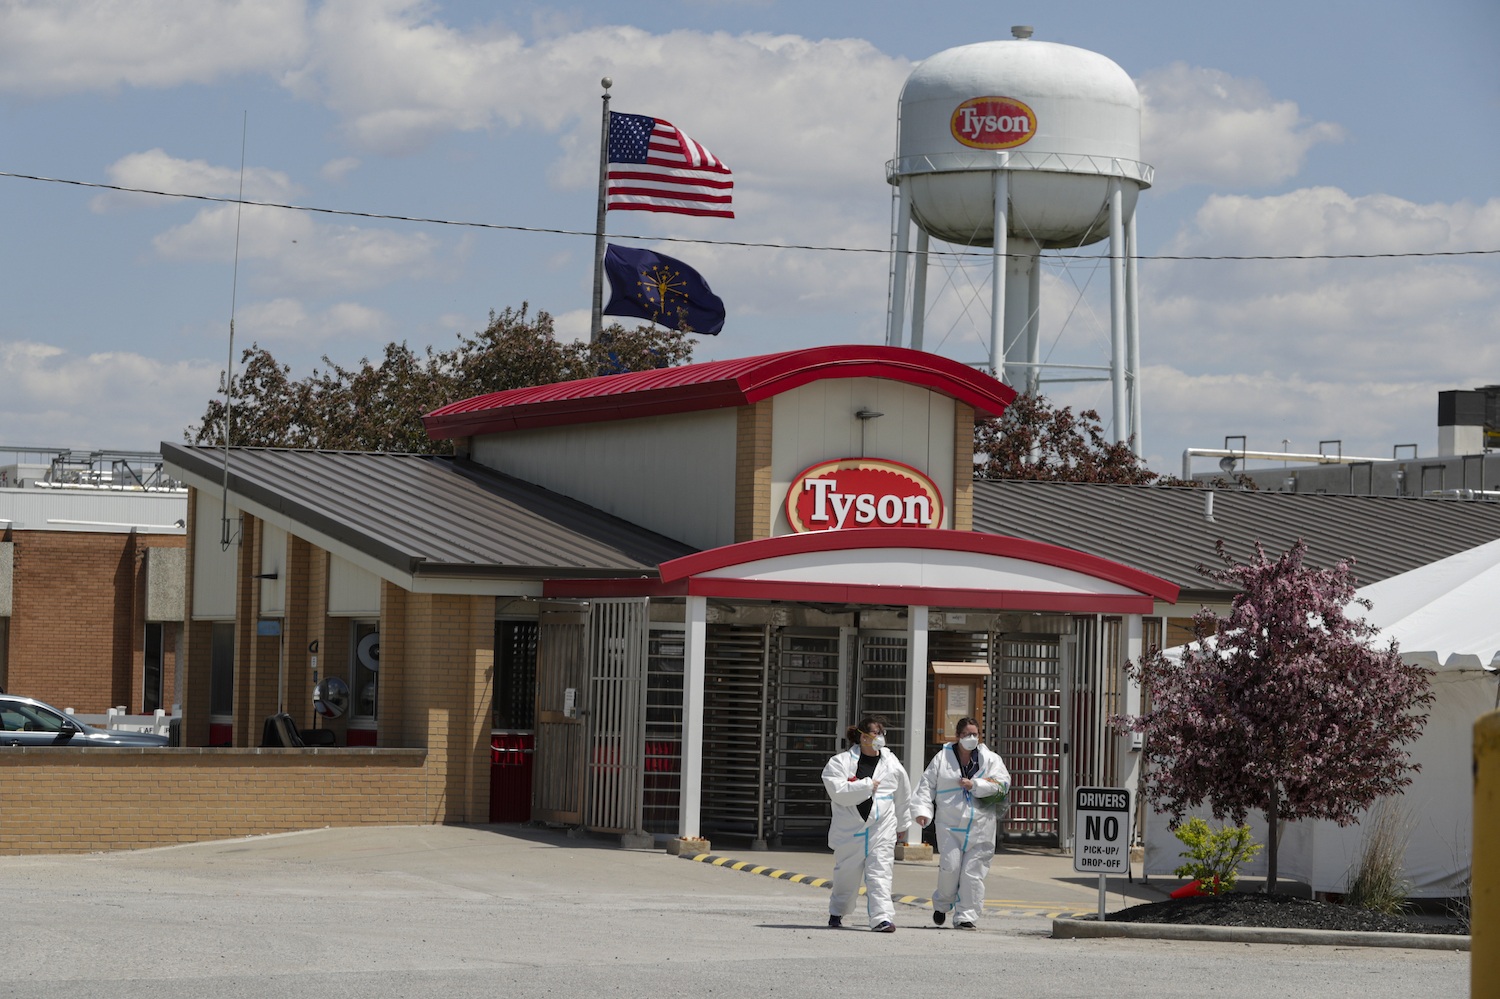 Tyson foods pork processing plant workers in Logansport, Ind. July 2020